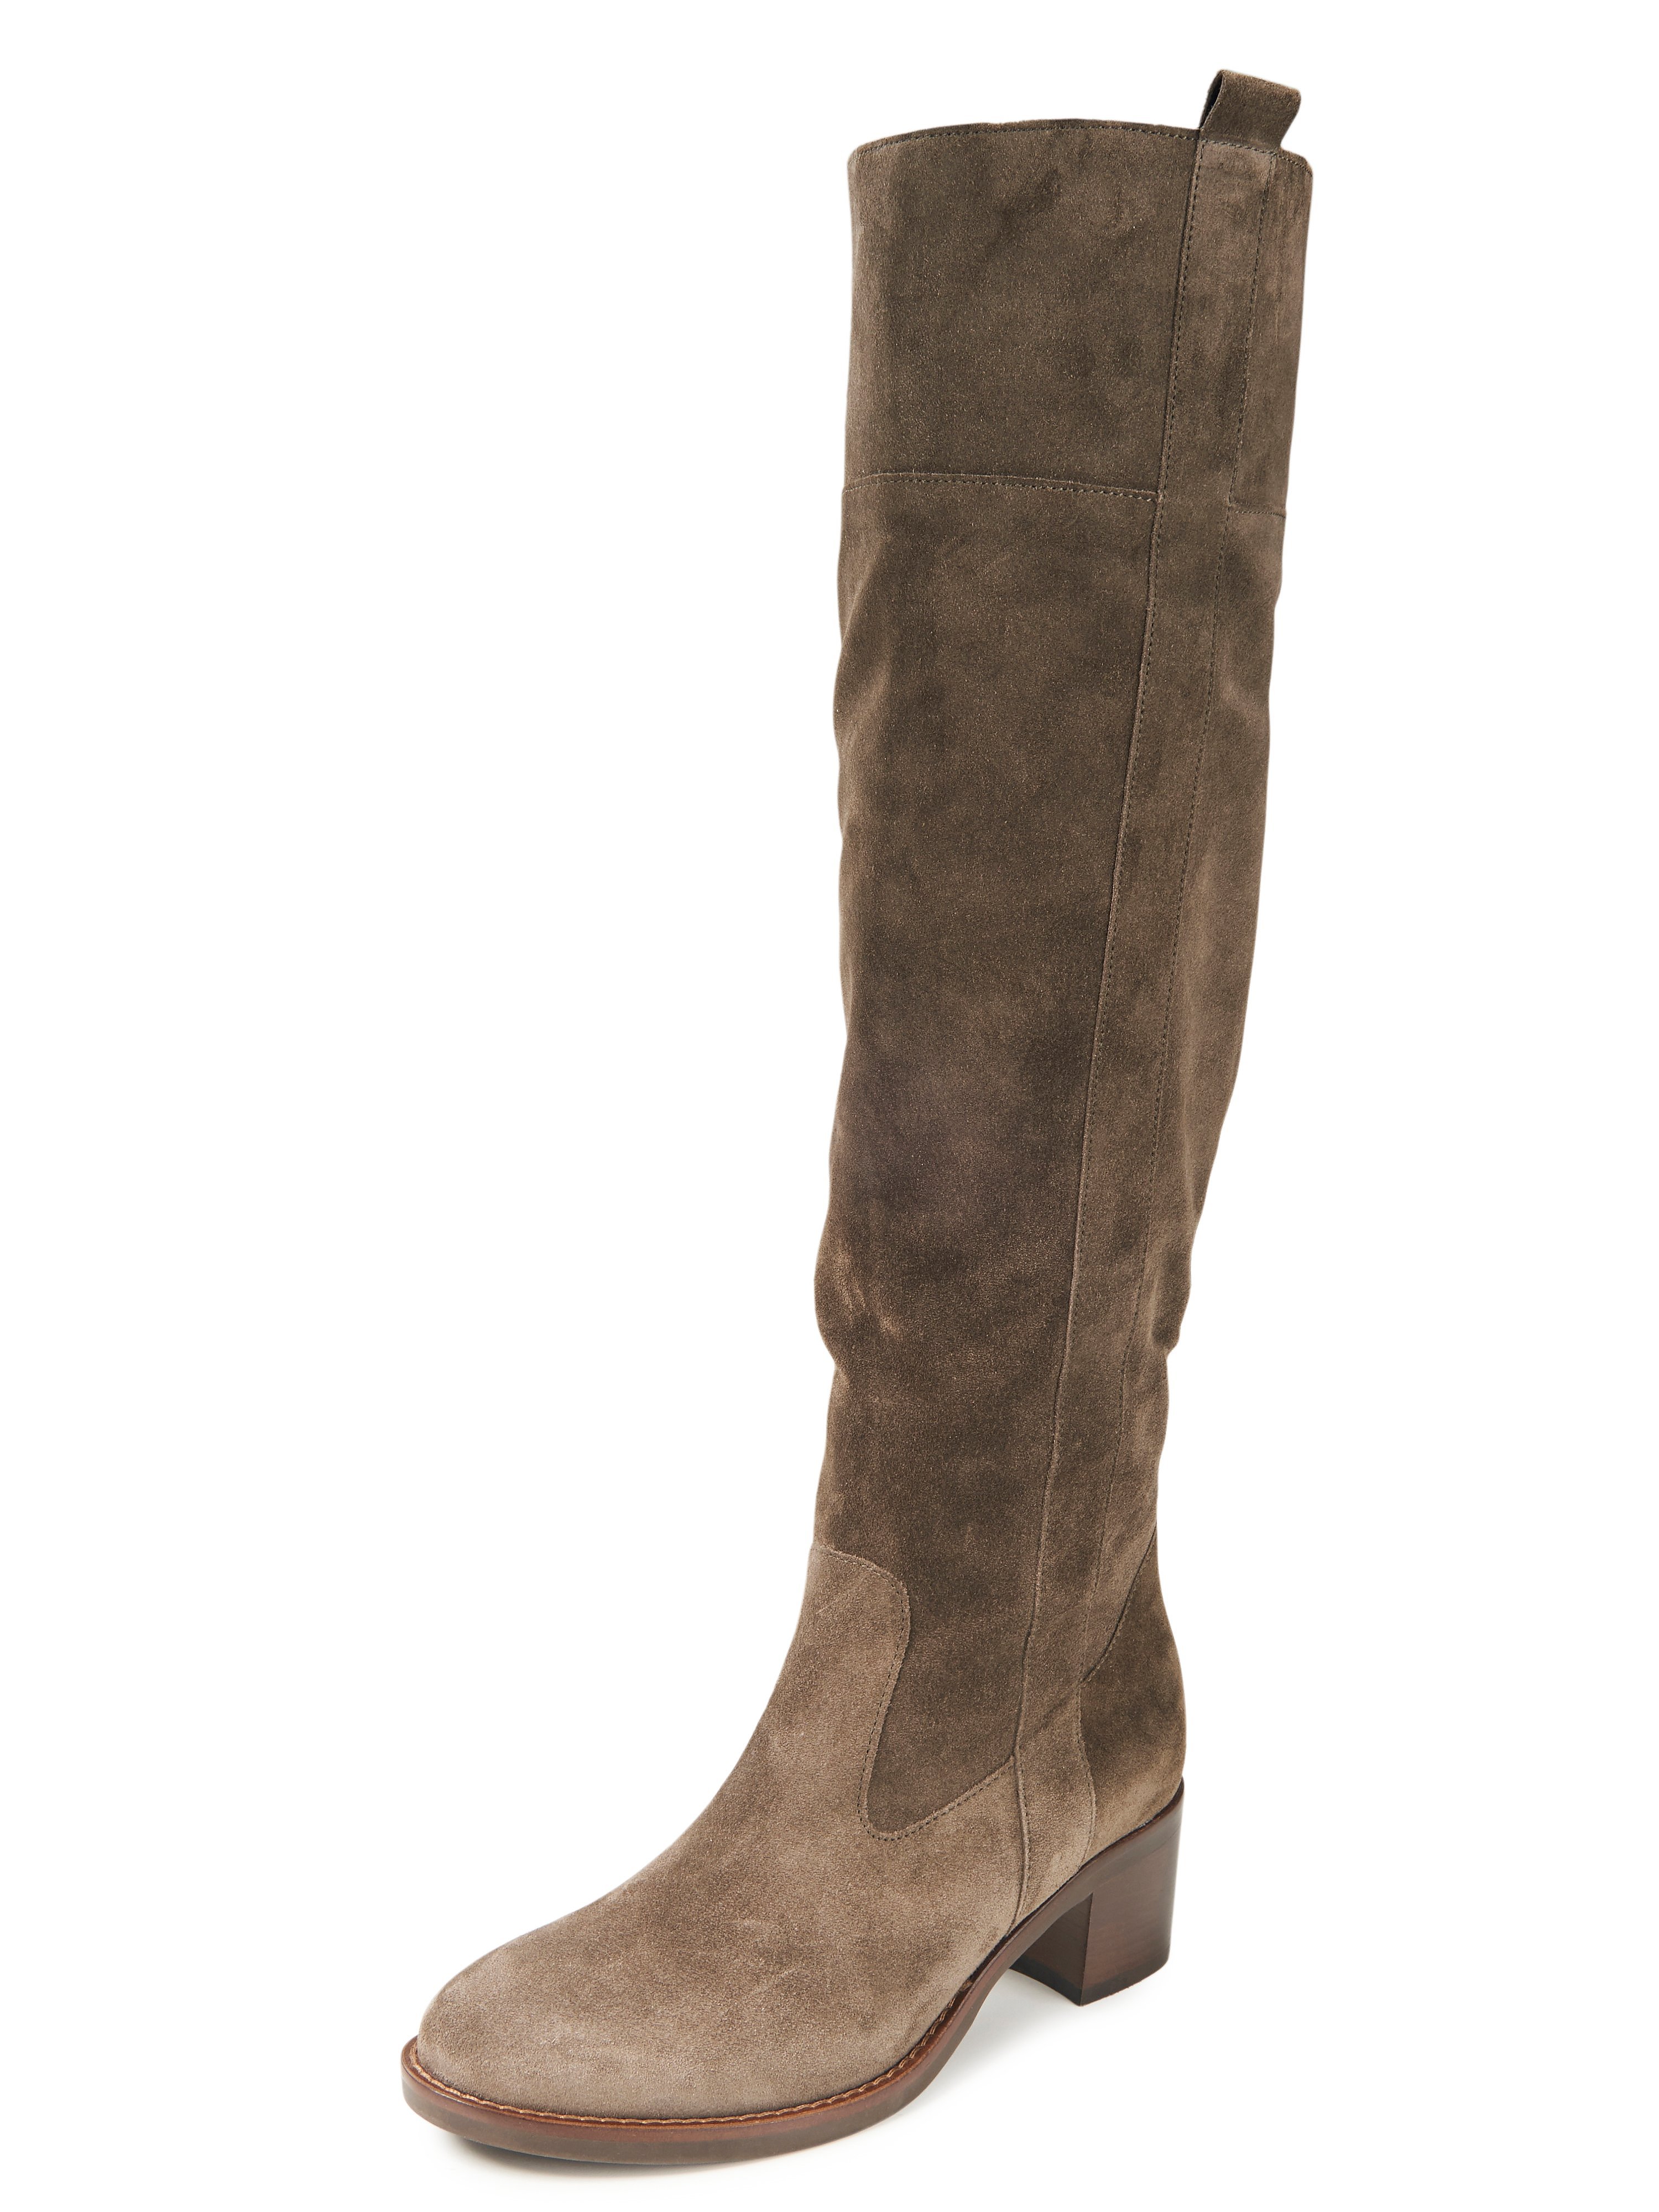 High boots in calf suede leather Gabor beige